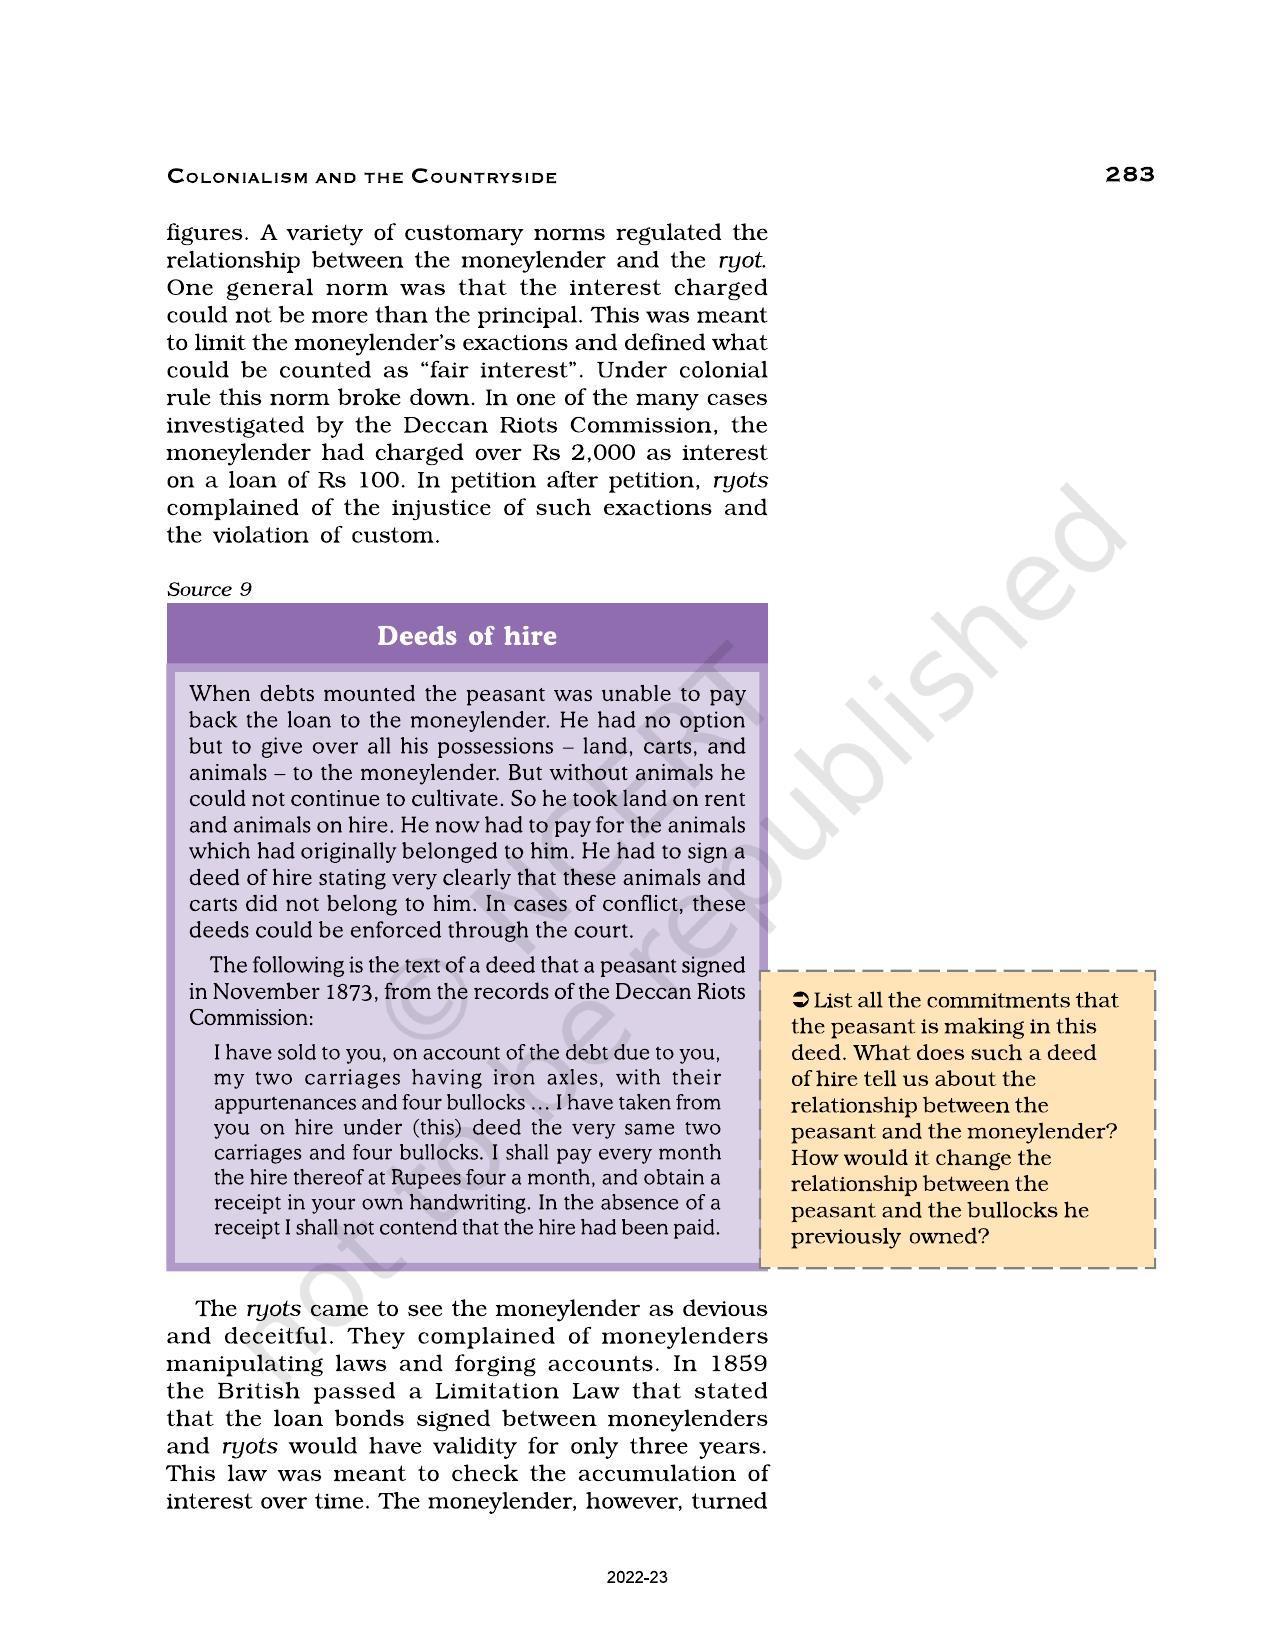 NCERT Book for Class 12 History (Part-II) Chapter 10 Colonialism and the Countryside - Page 27